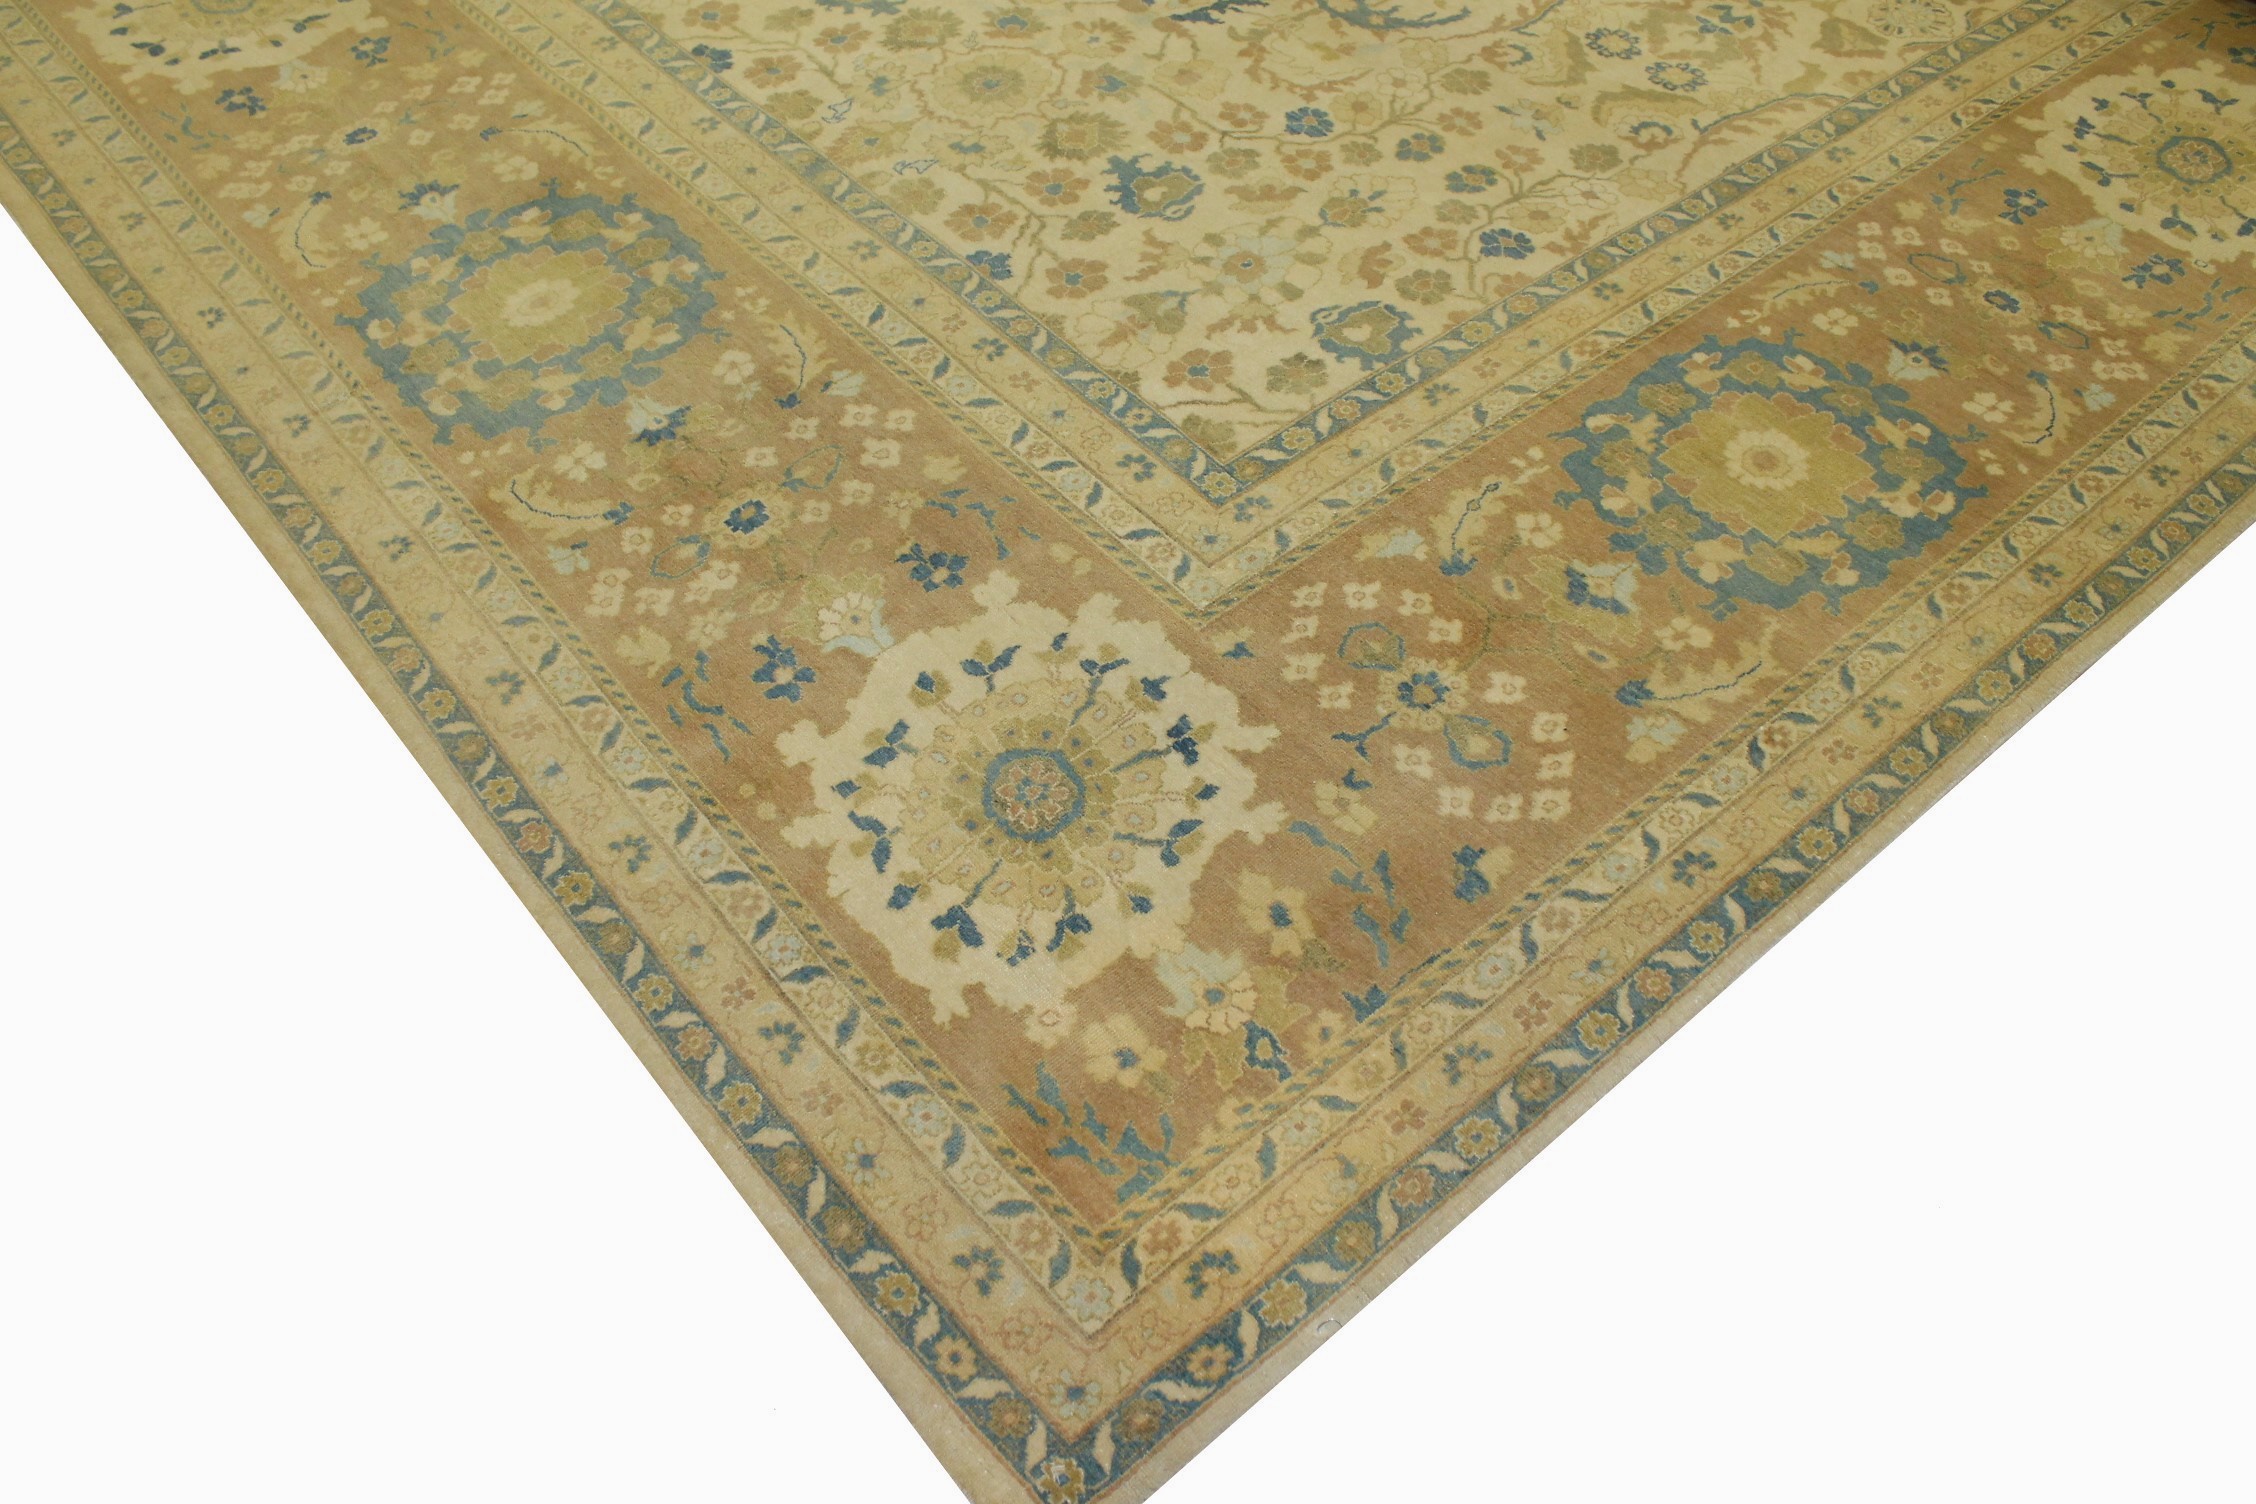 10x14 Antique Revival Hand Knotted Wool Area Rug - MR11216